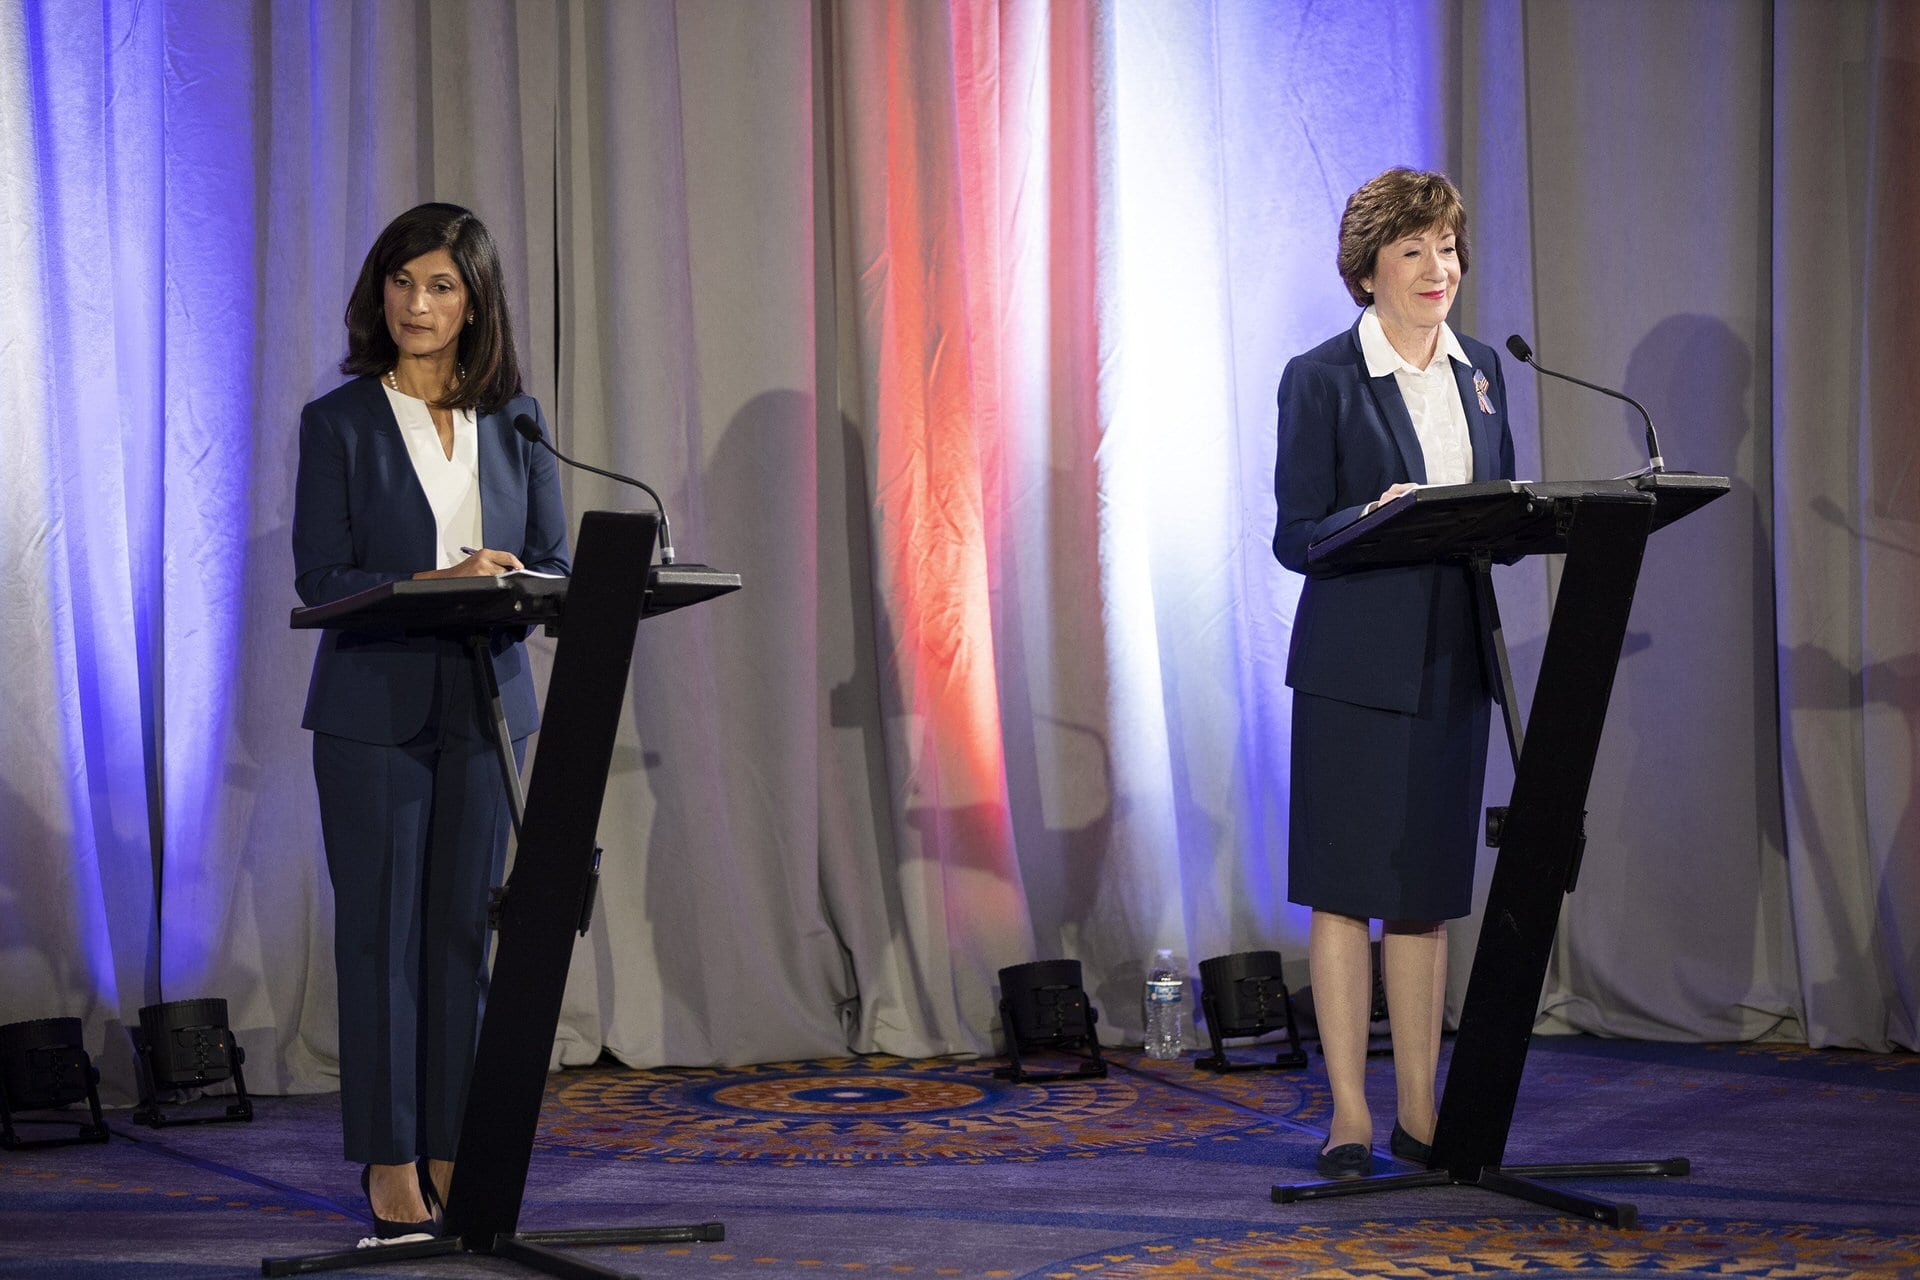 Maine House Speaker Sara Gideon and incumbent Sen. Susan Collins participate in the debate at the Holiday Inn By The Bay alongside fellow candidates Lisa Savage and Max Linn on Friday, September 11, 2020.